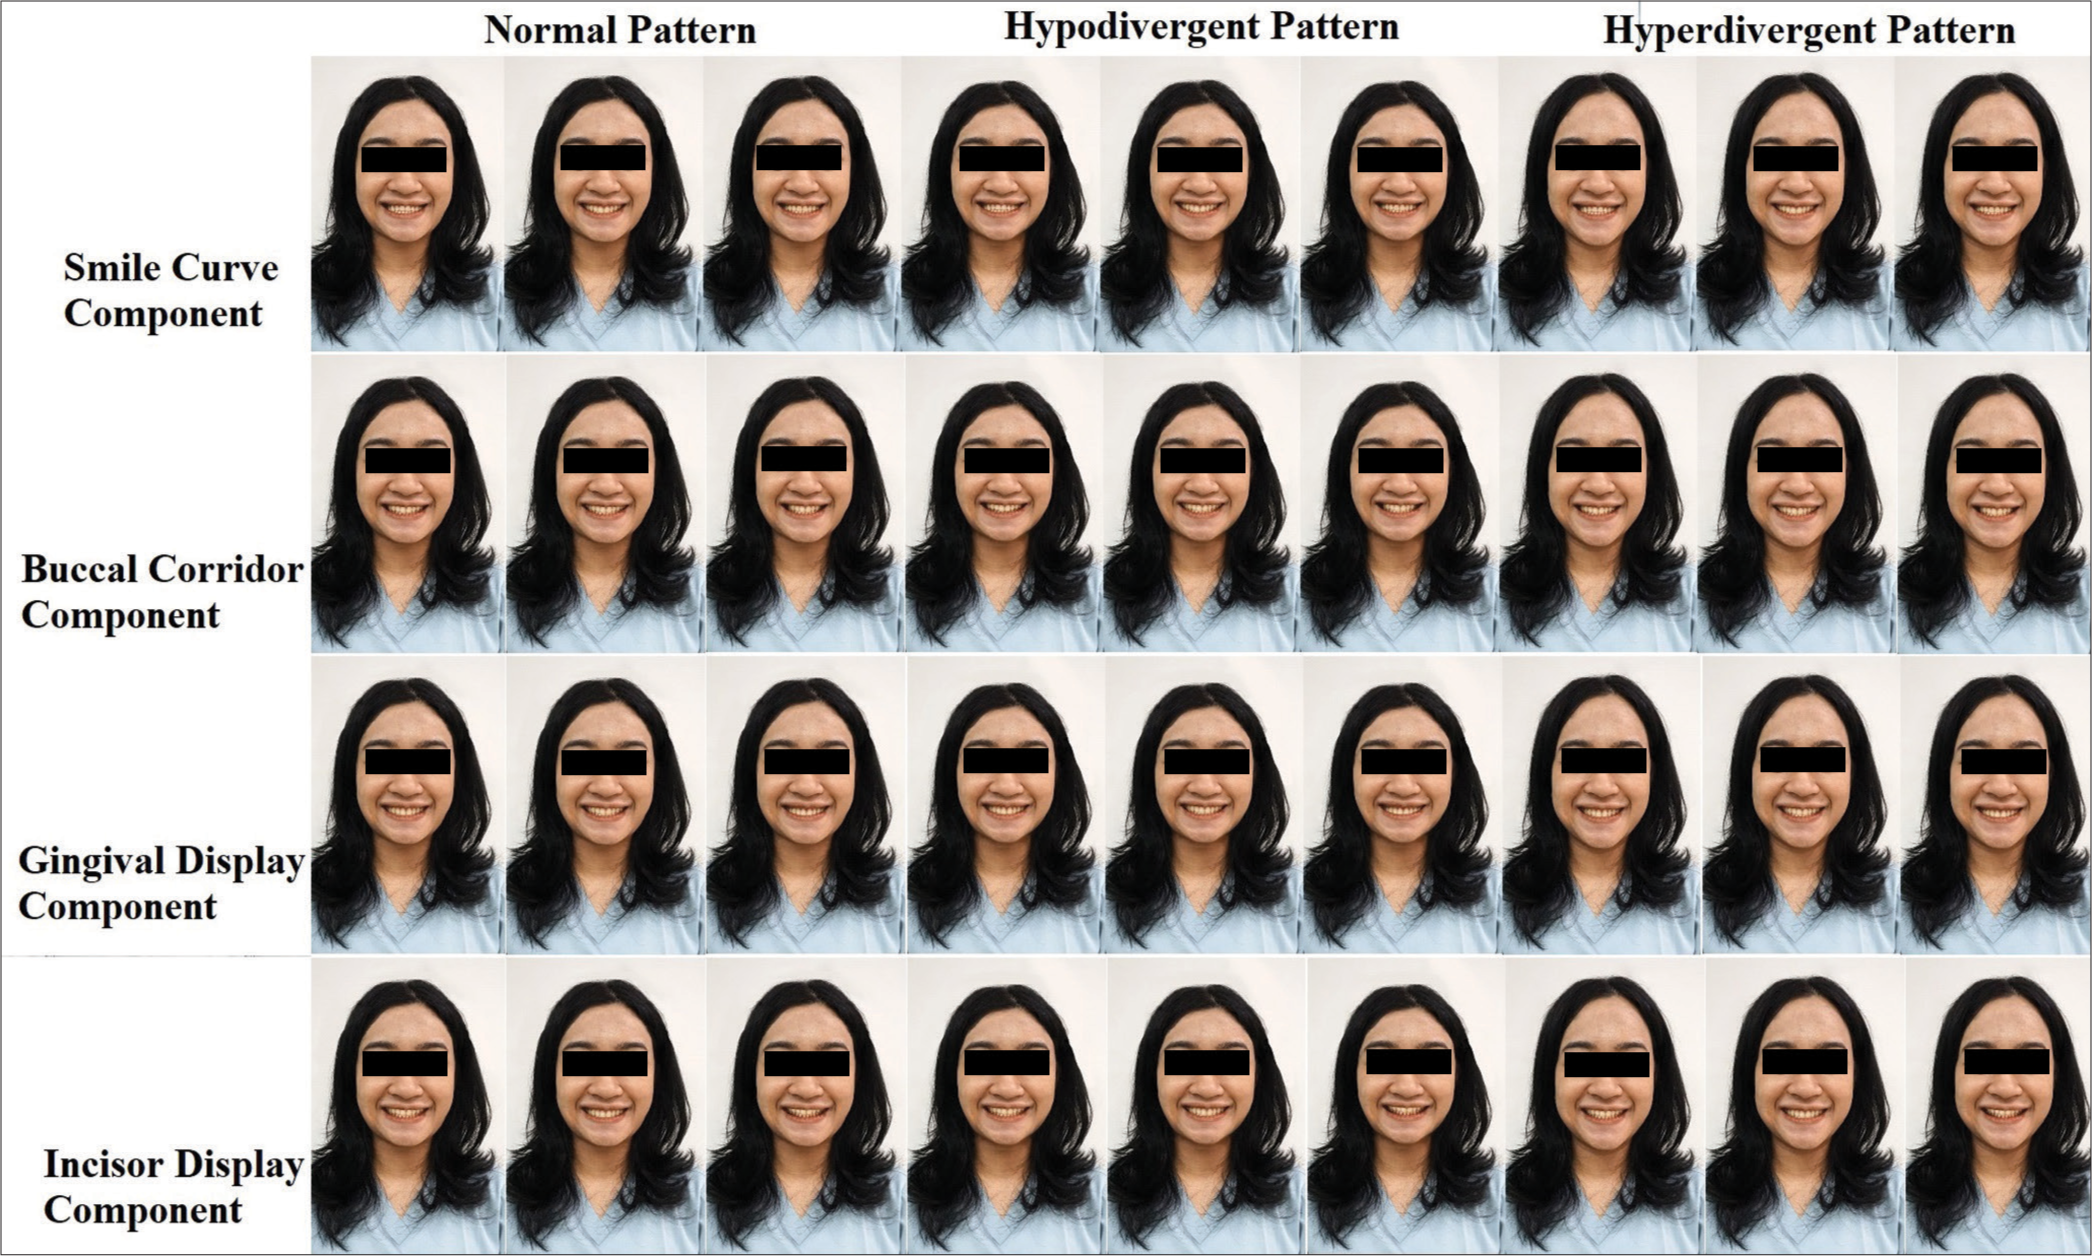 Indonesian orthodontists and laypeople’s perception of the four components of smile analysis in individuals with various vertical skeletal patterns